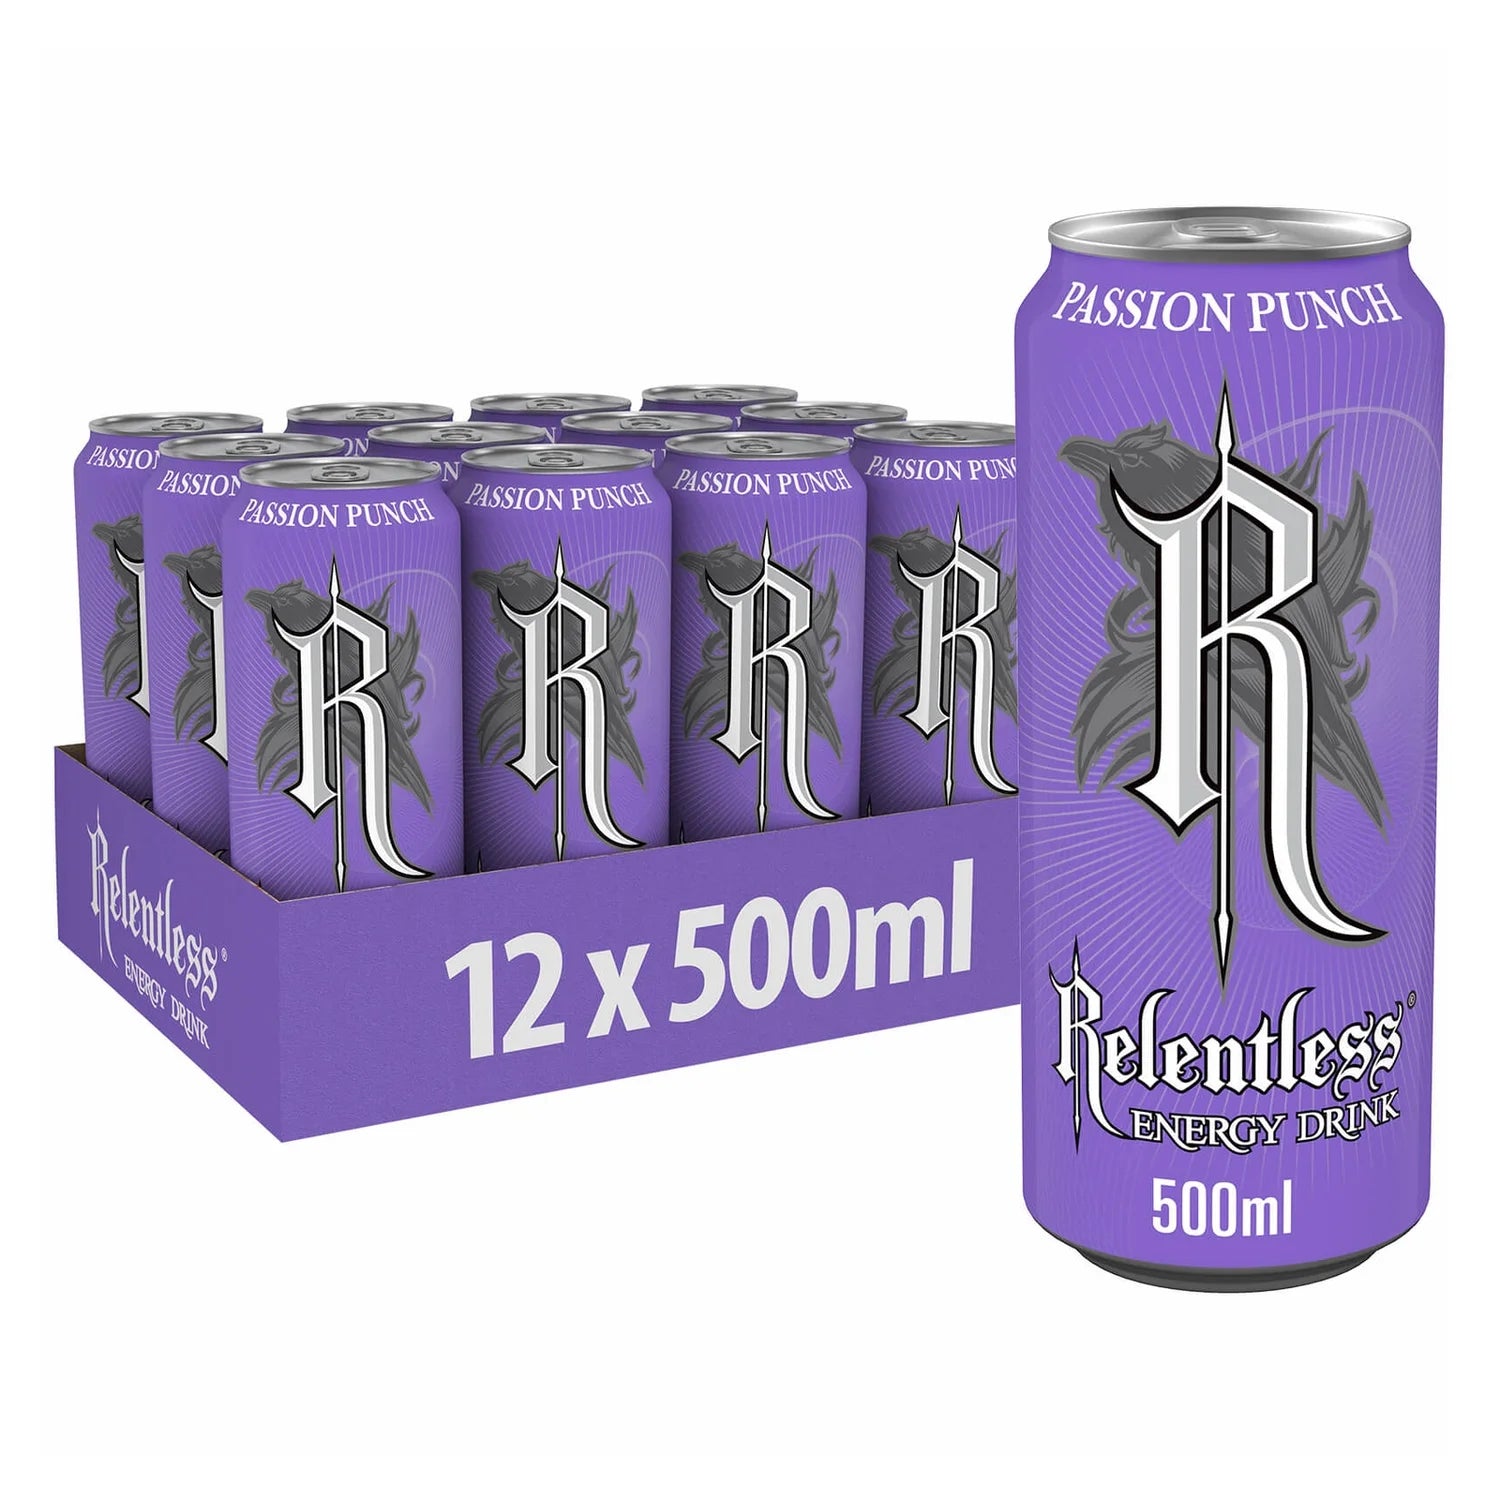 Relentless Passion Punch Energy Drink - 500ml - case of 12